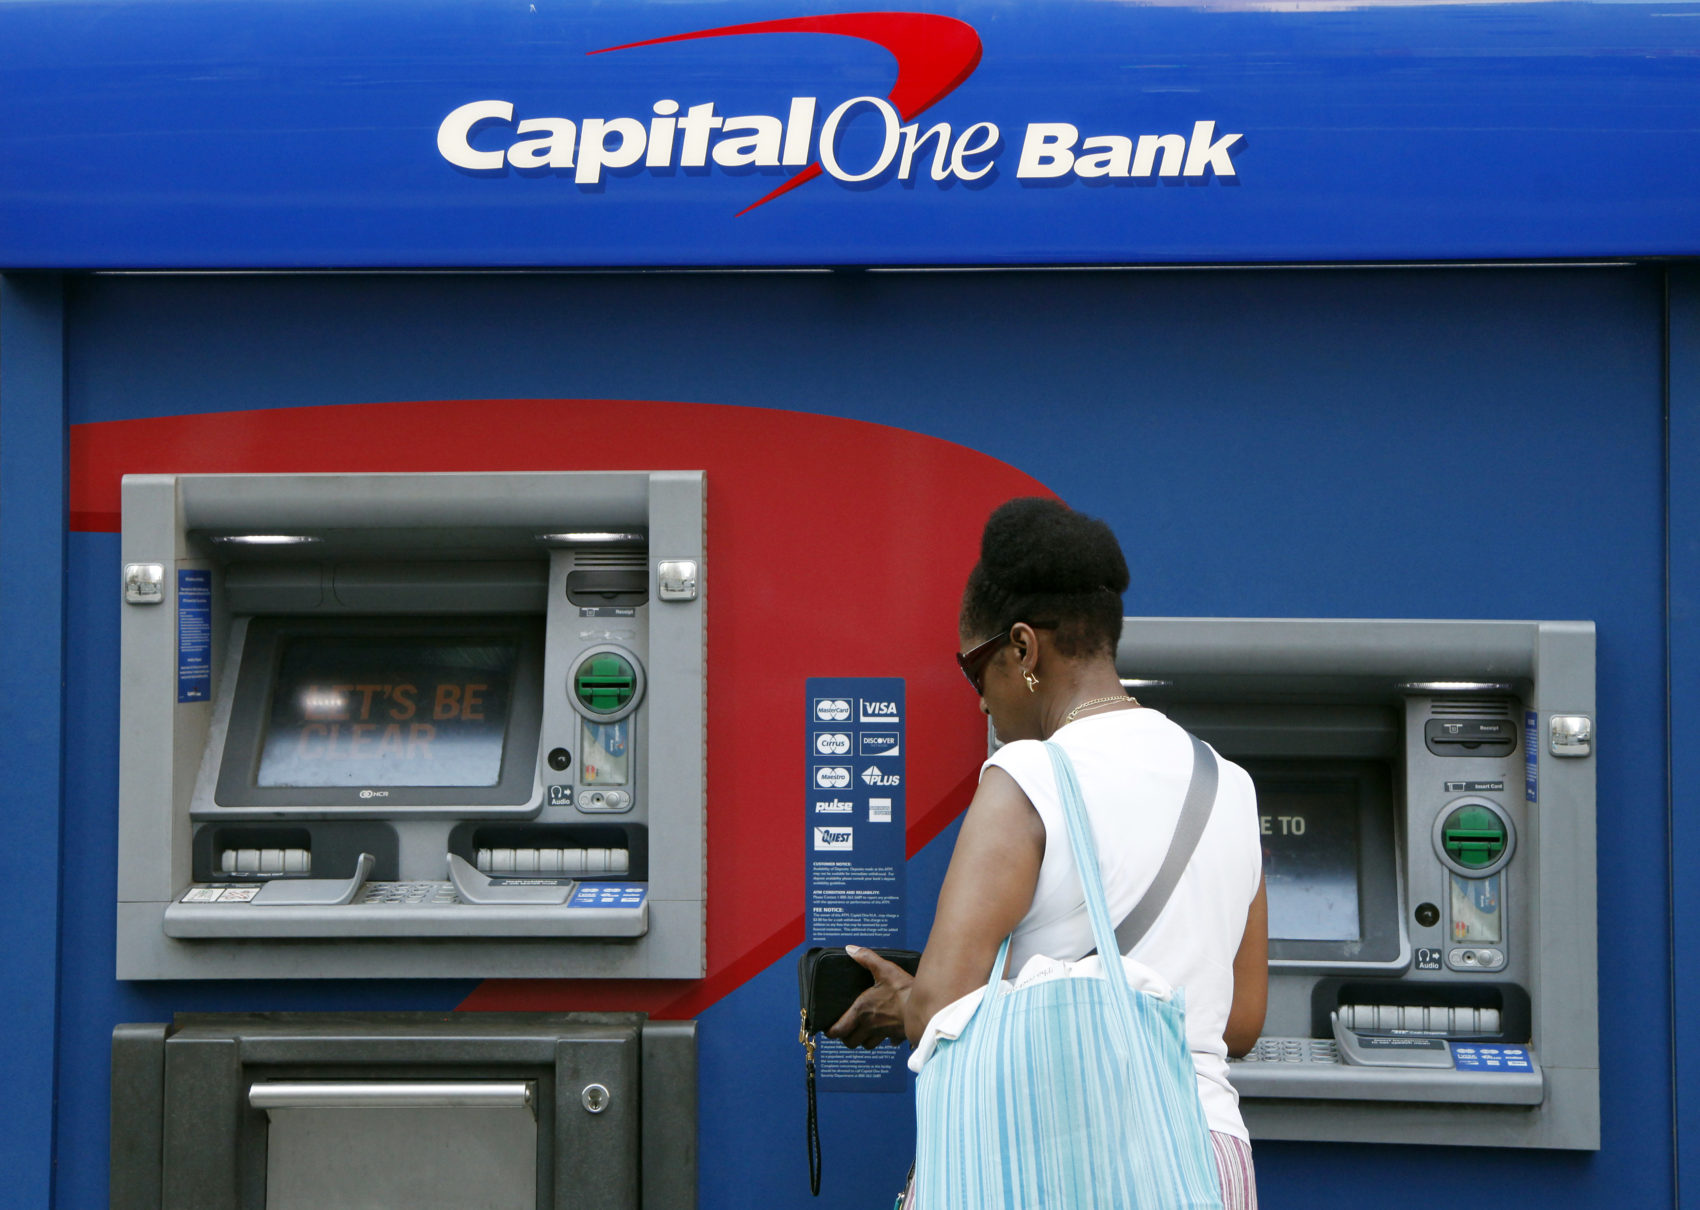 Capital one bank: How to Deposit Check with Mobile app and ATM